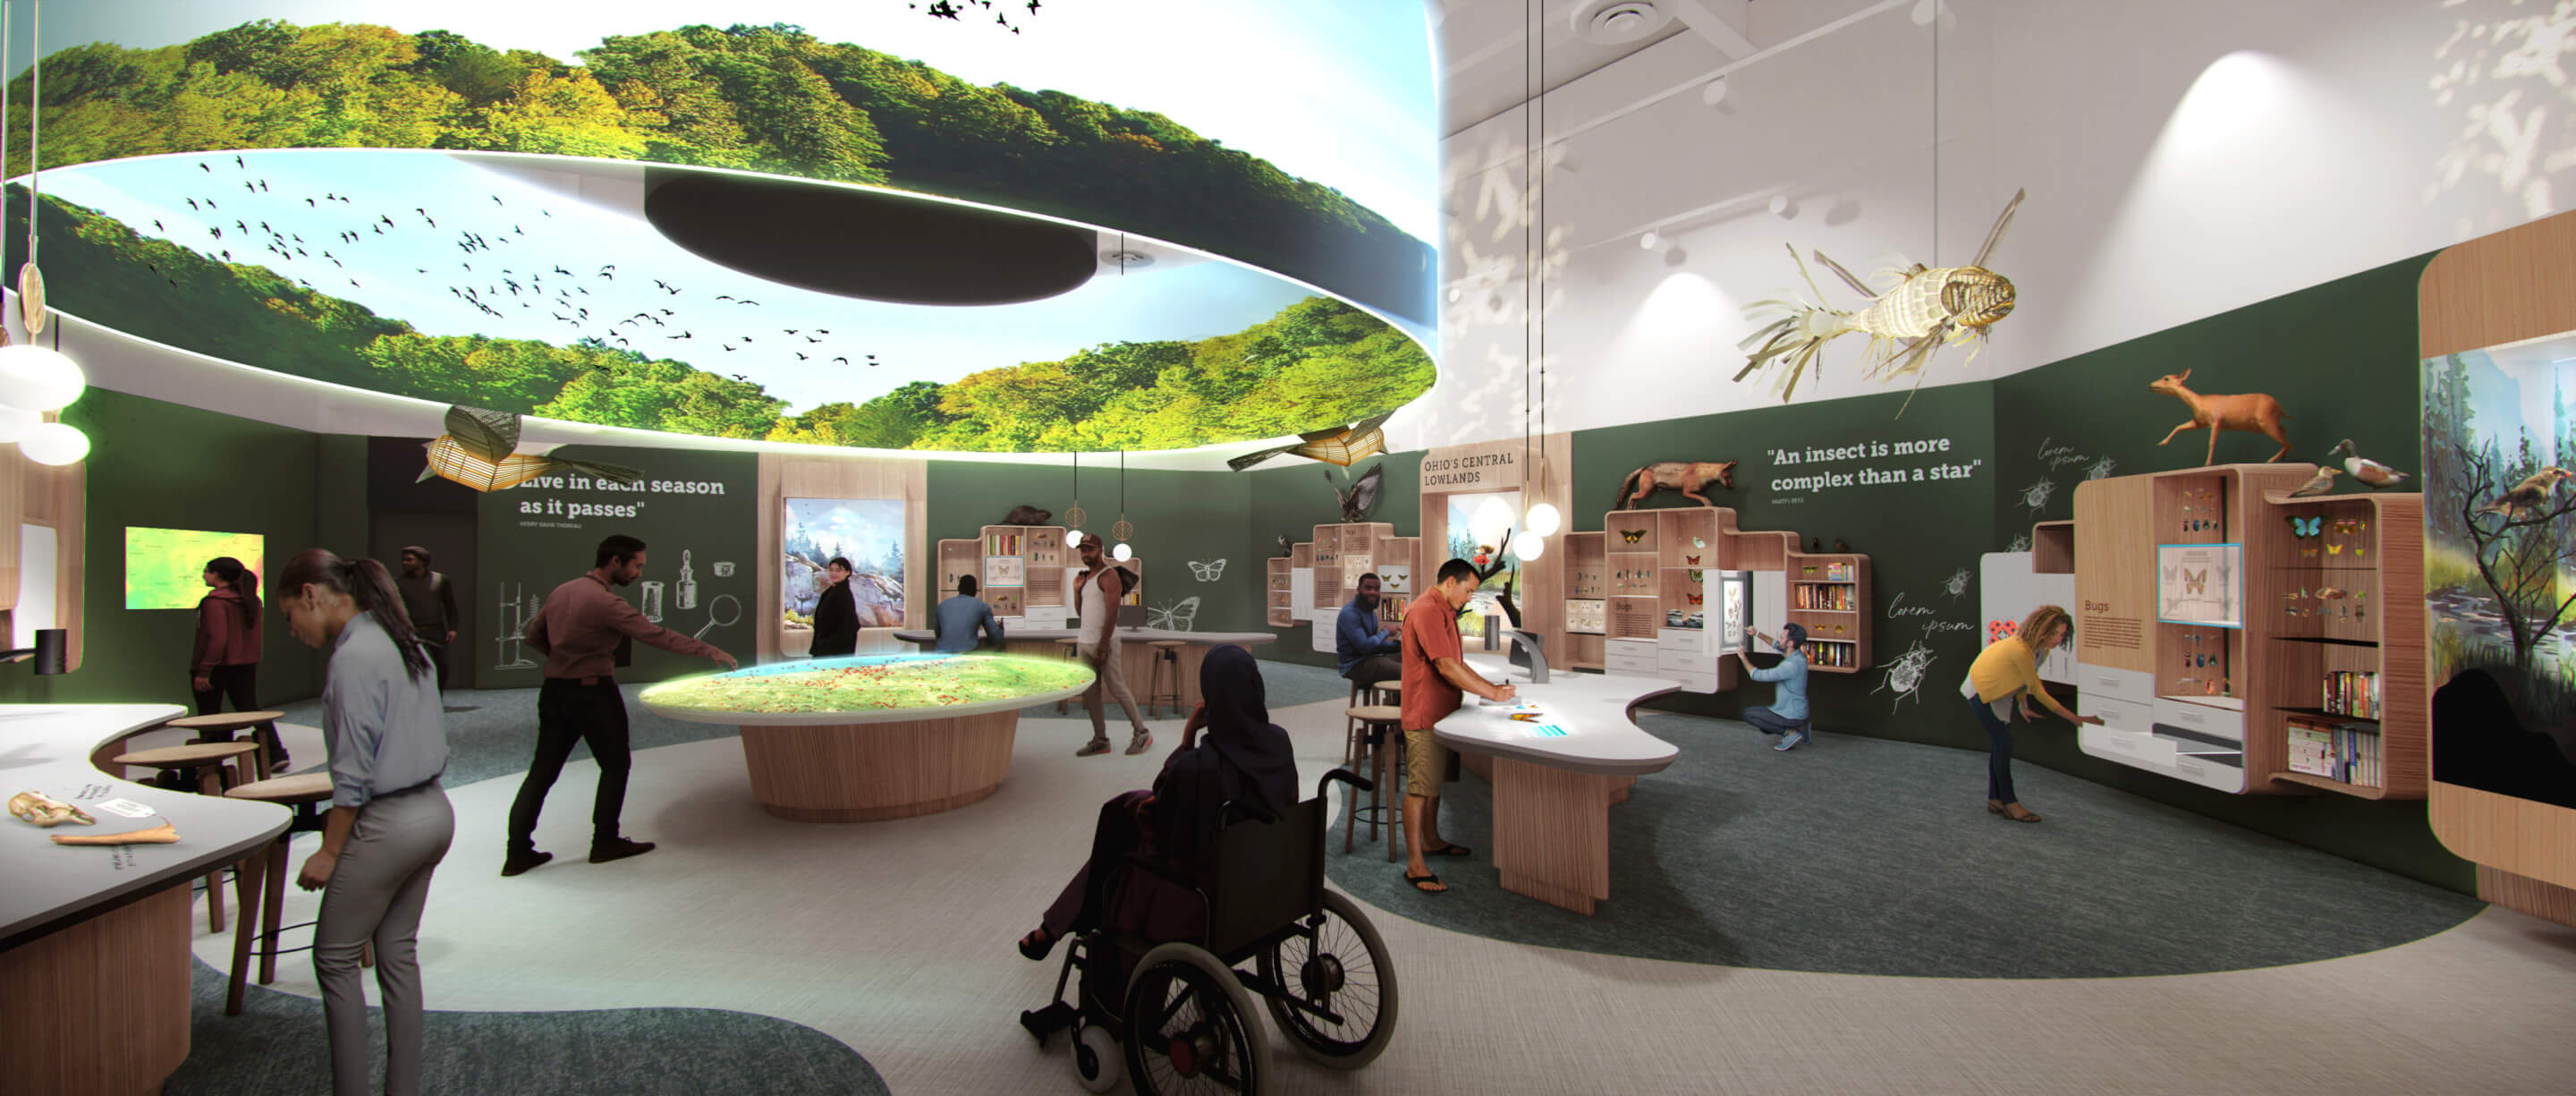 rendering of visitors exploring an interactive space at a natural history museum